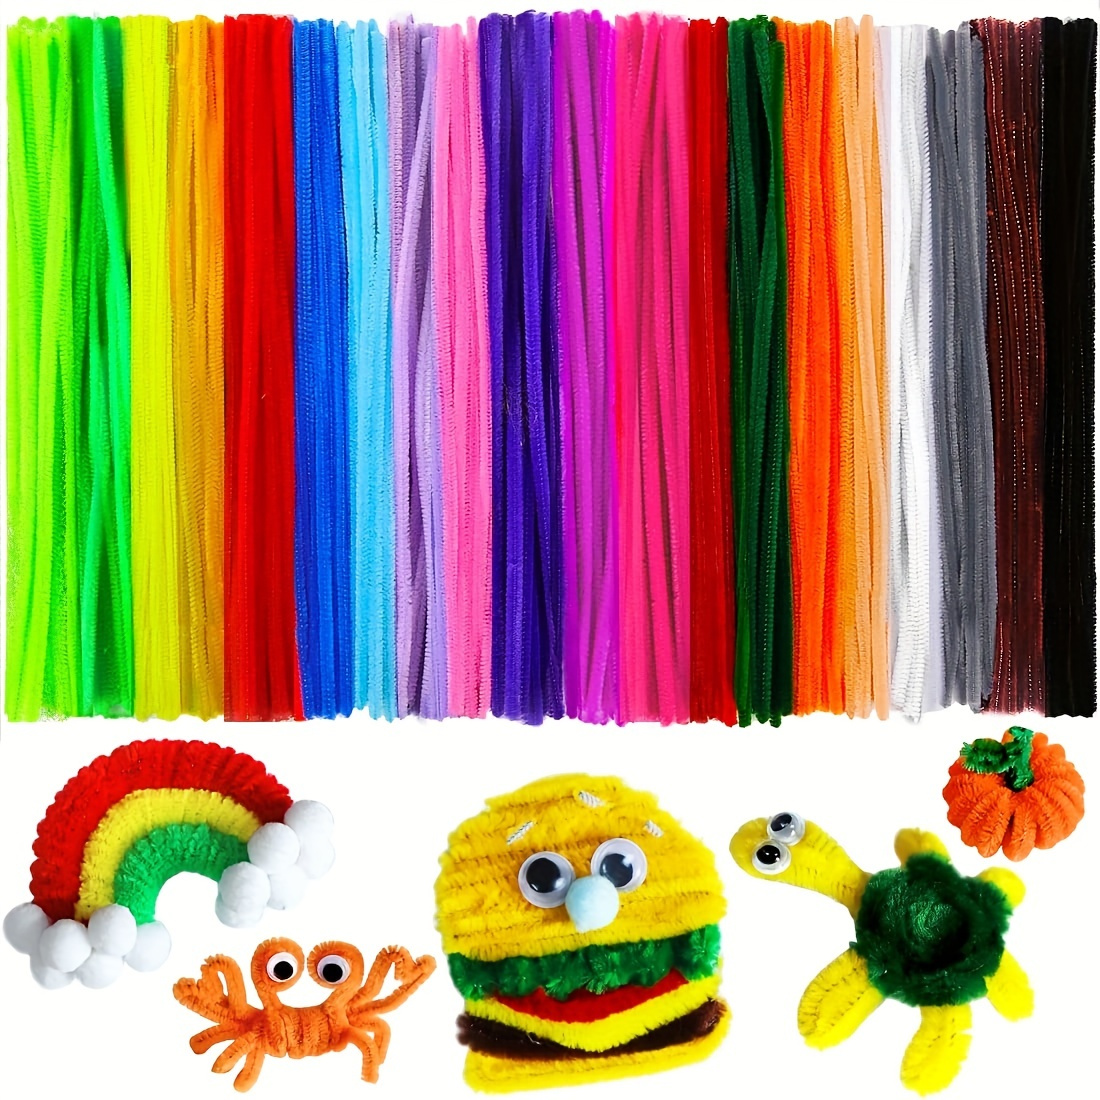 100Pcs Pipe Cleaners Fuzzy Sticks Soft Twist Bar Various Artworks